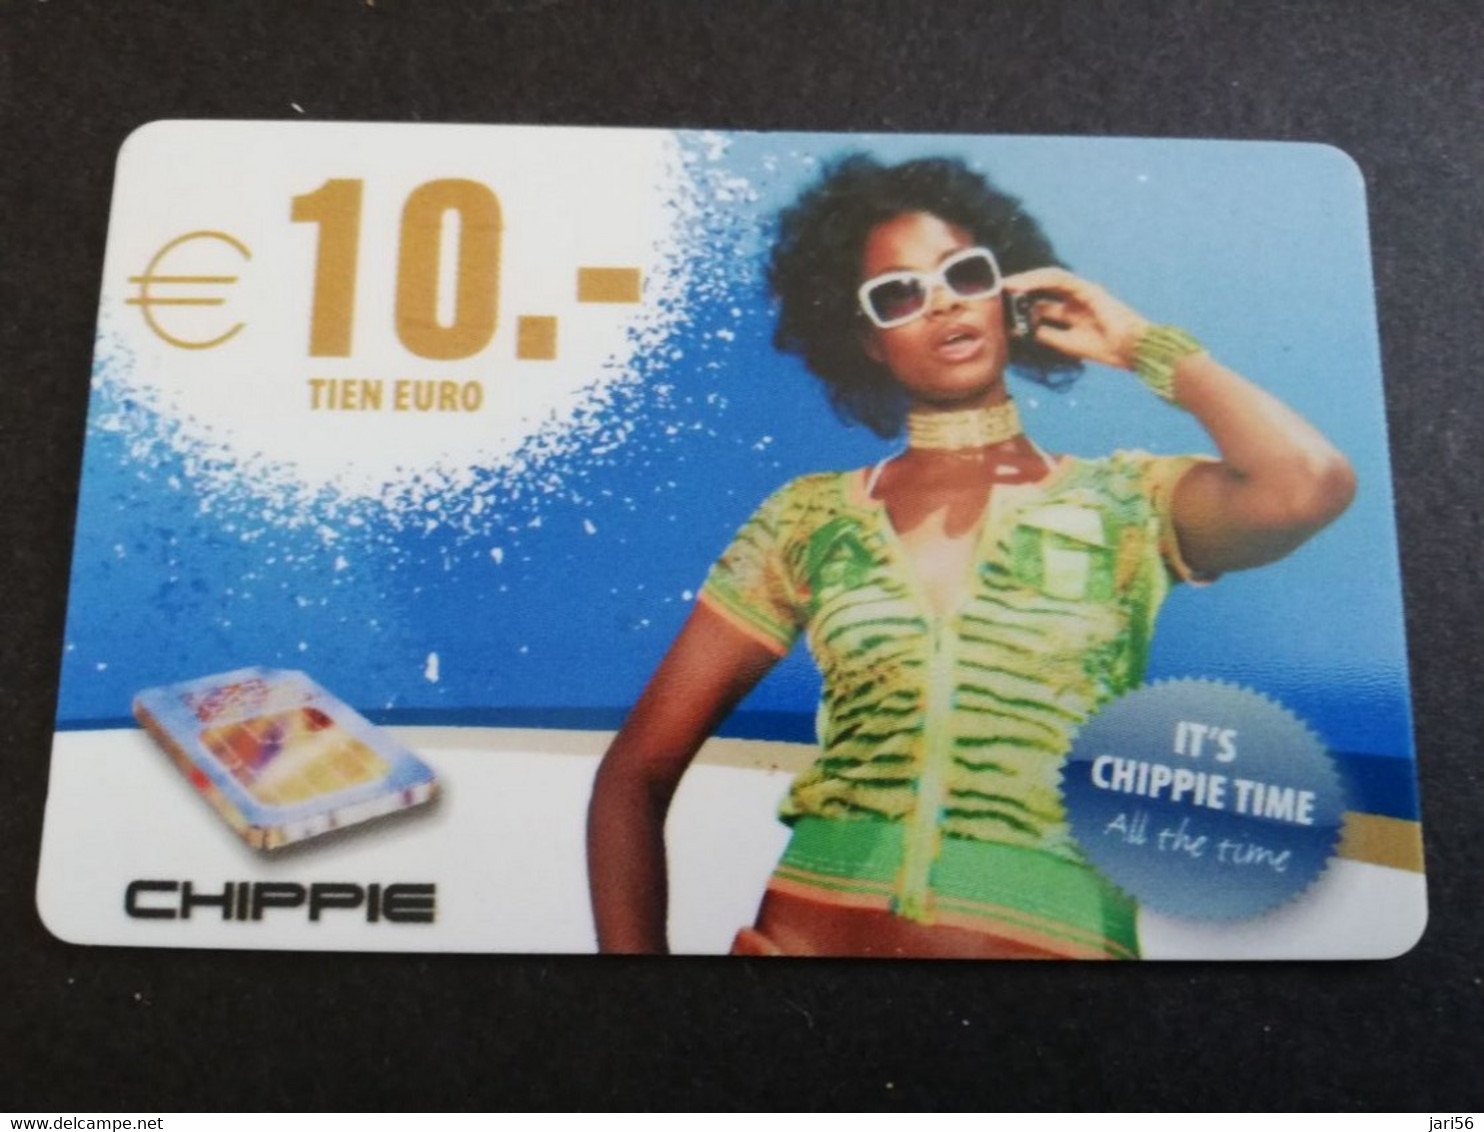 CURACAO  NAF 10- CHIPPIE / ITS CHIPPIE TIME              Fine Used Card   **4910** - Antilles (Netherlands)